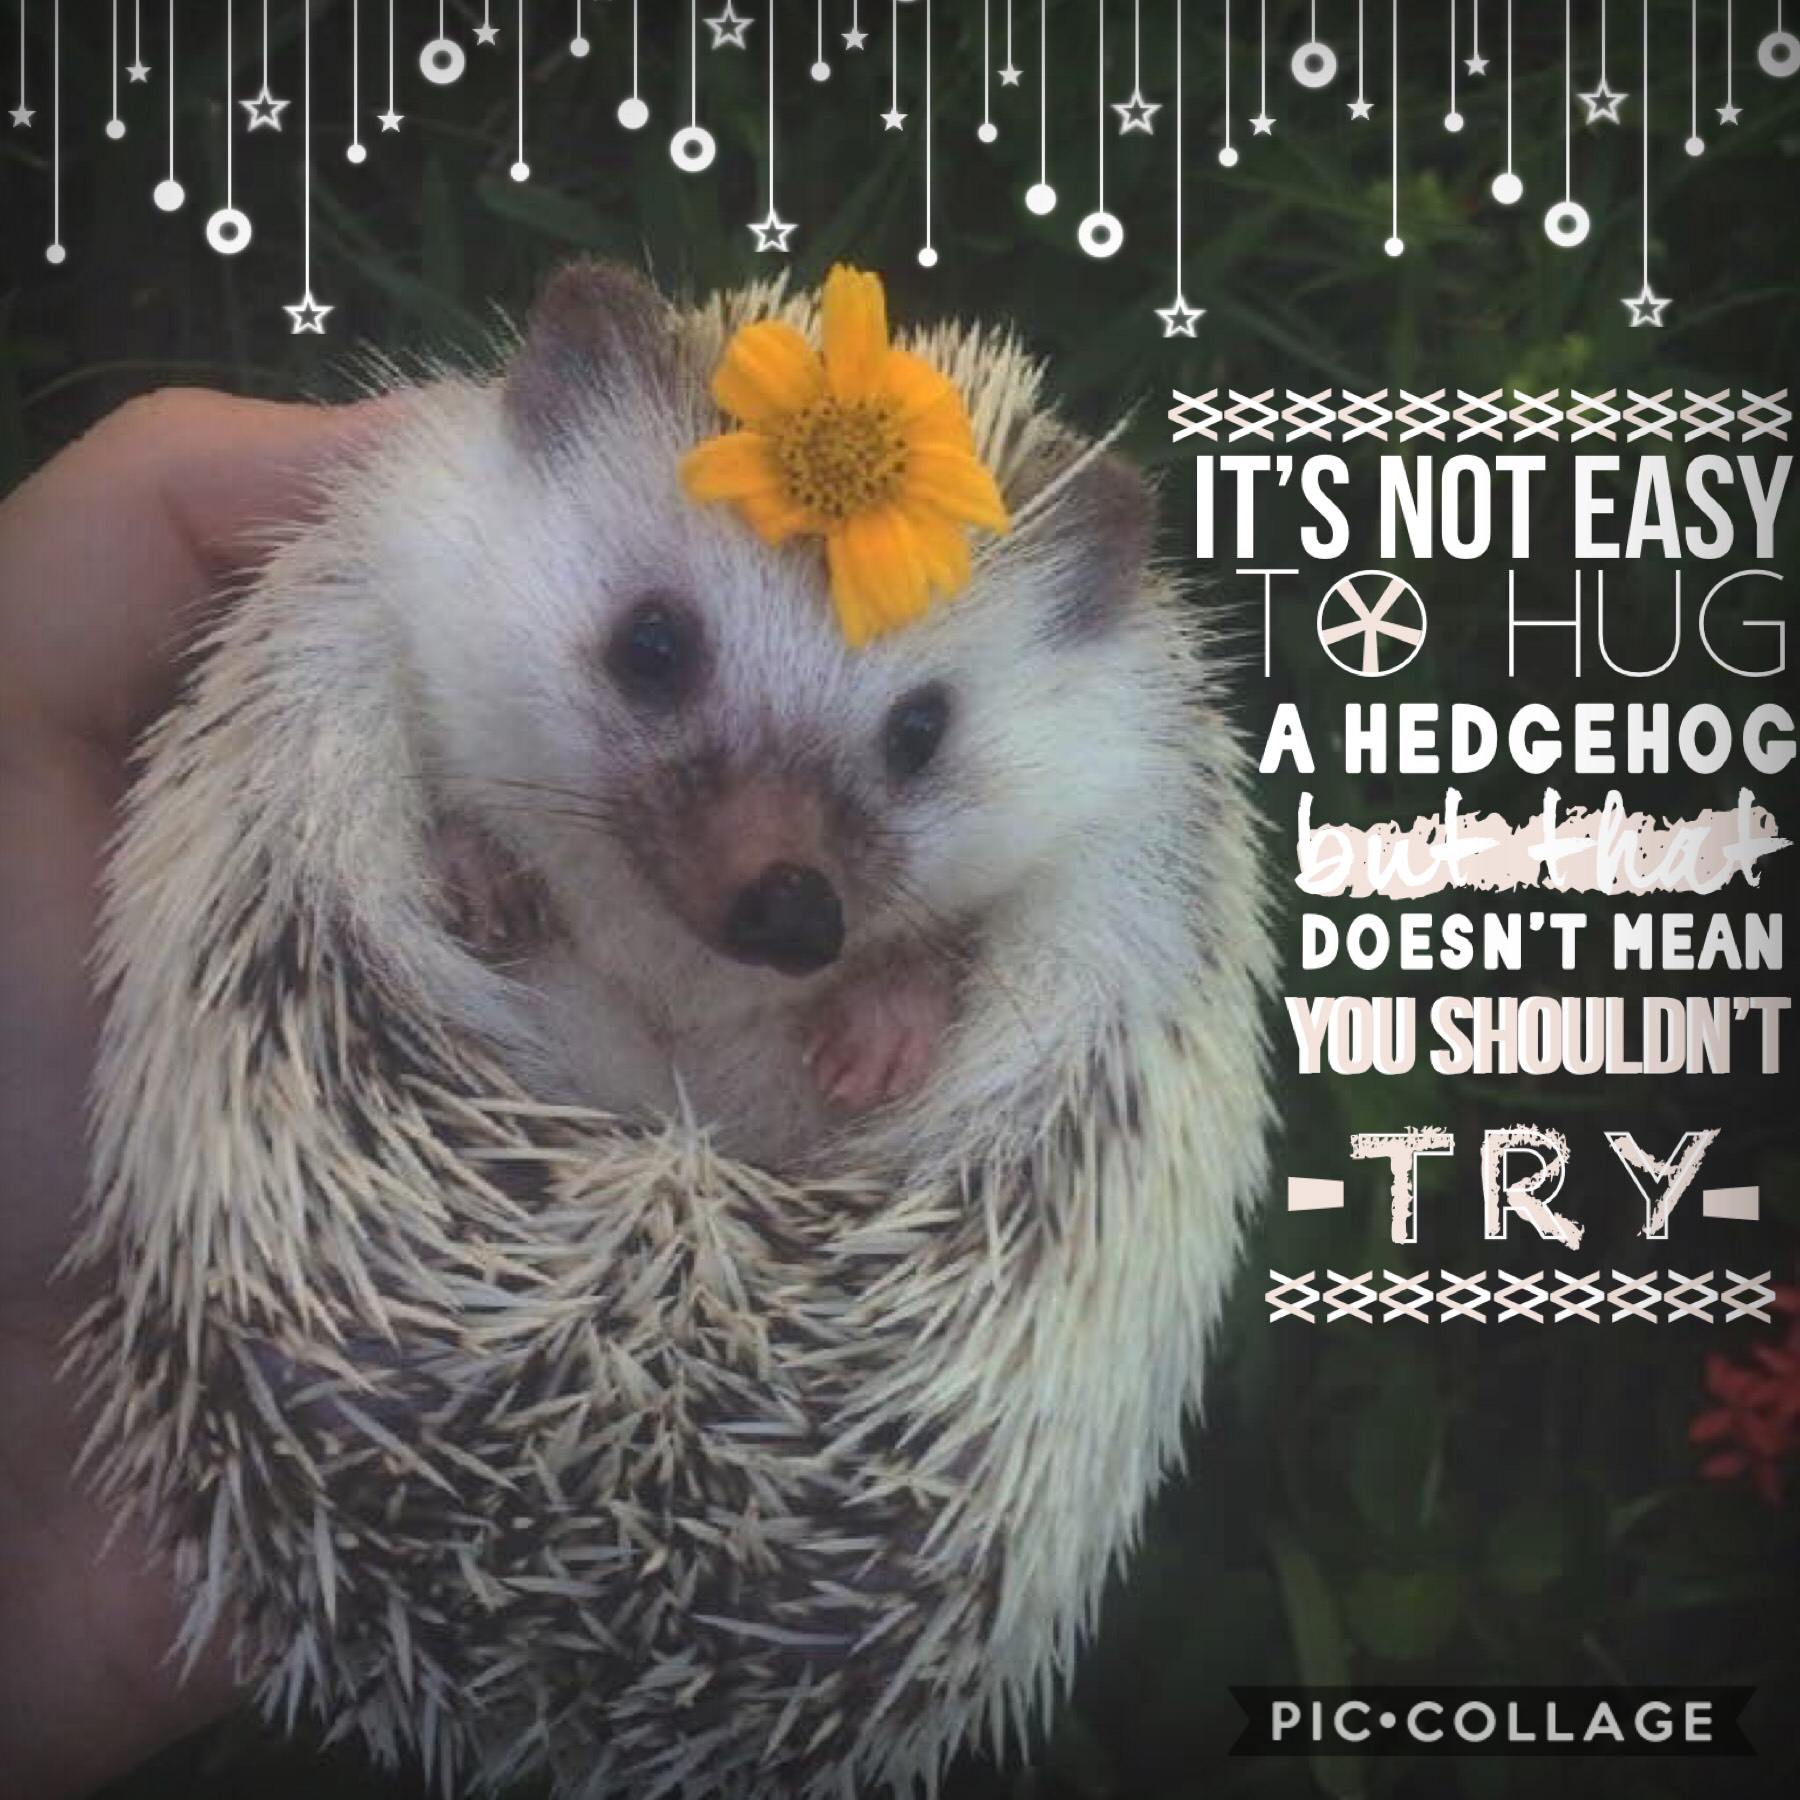 🦔Tap🦔
Do you guys want me to keep doing QOTDS? Many people don’t do them. Comment 🎃 if I should keep doing them. Tell me if not.
Rate /10!
